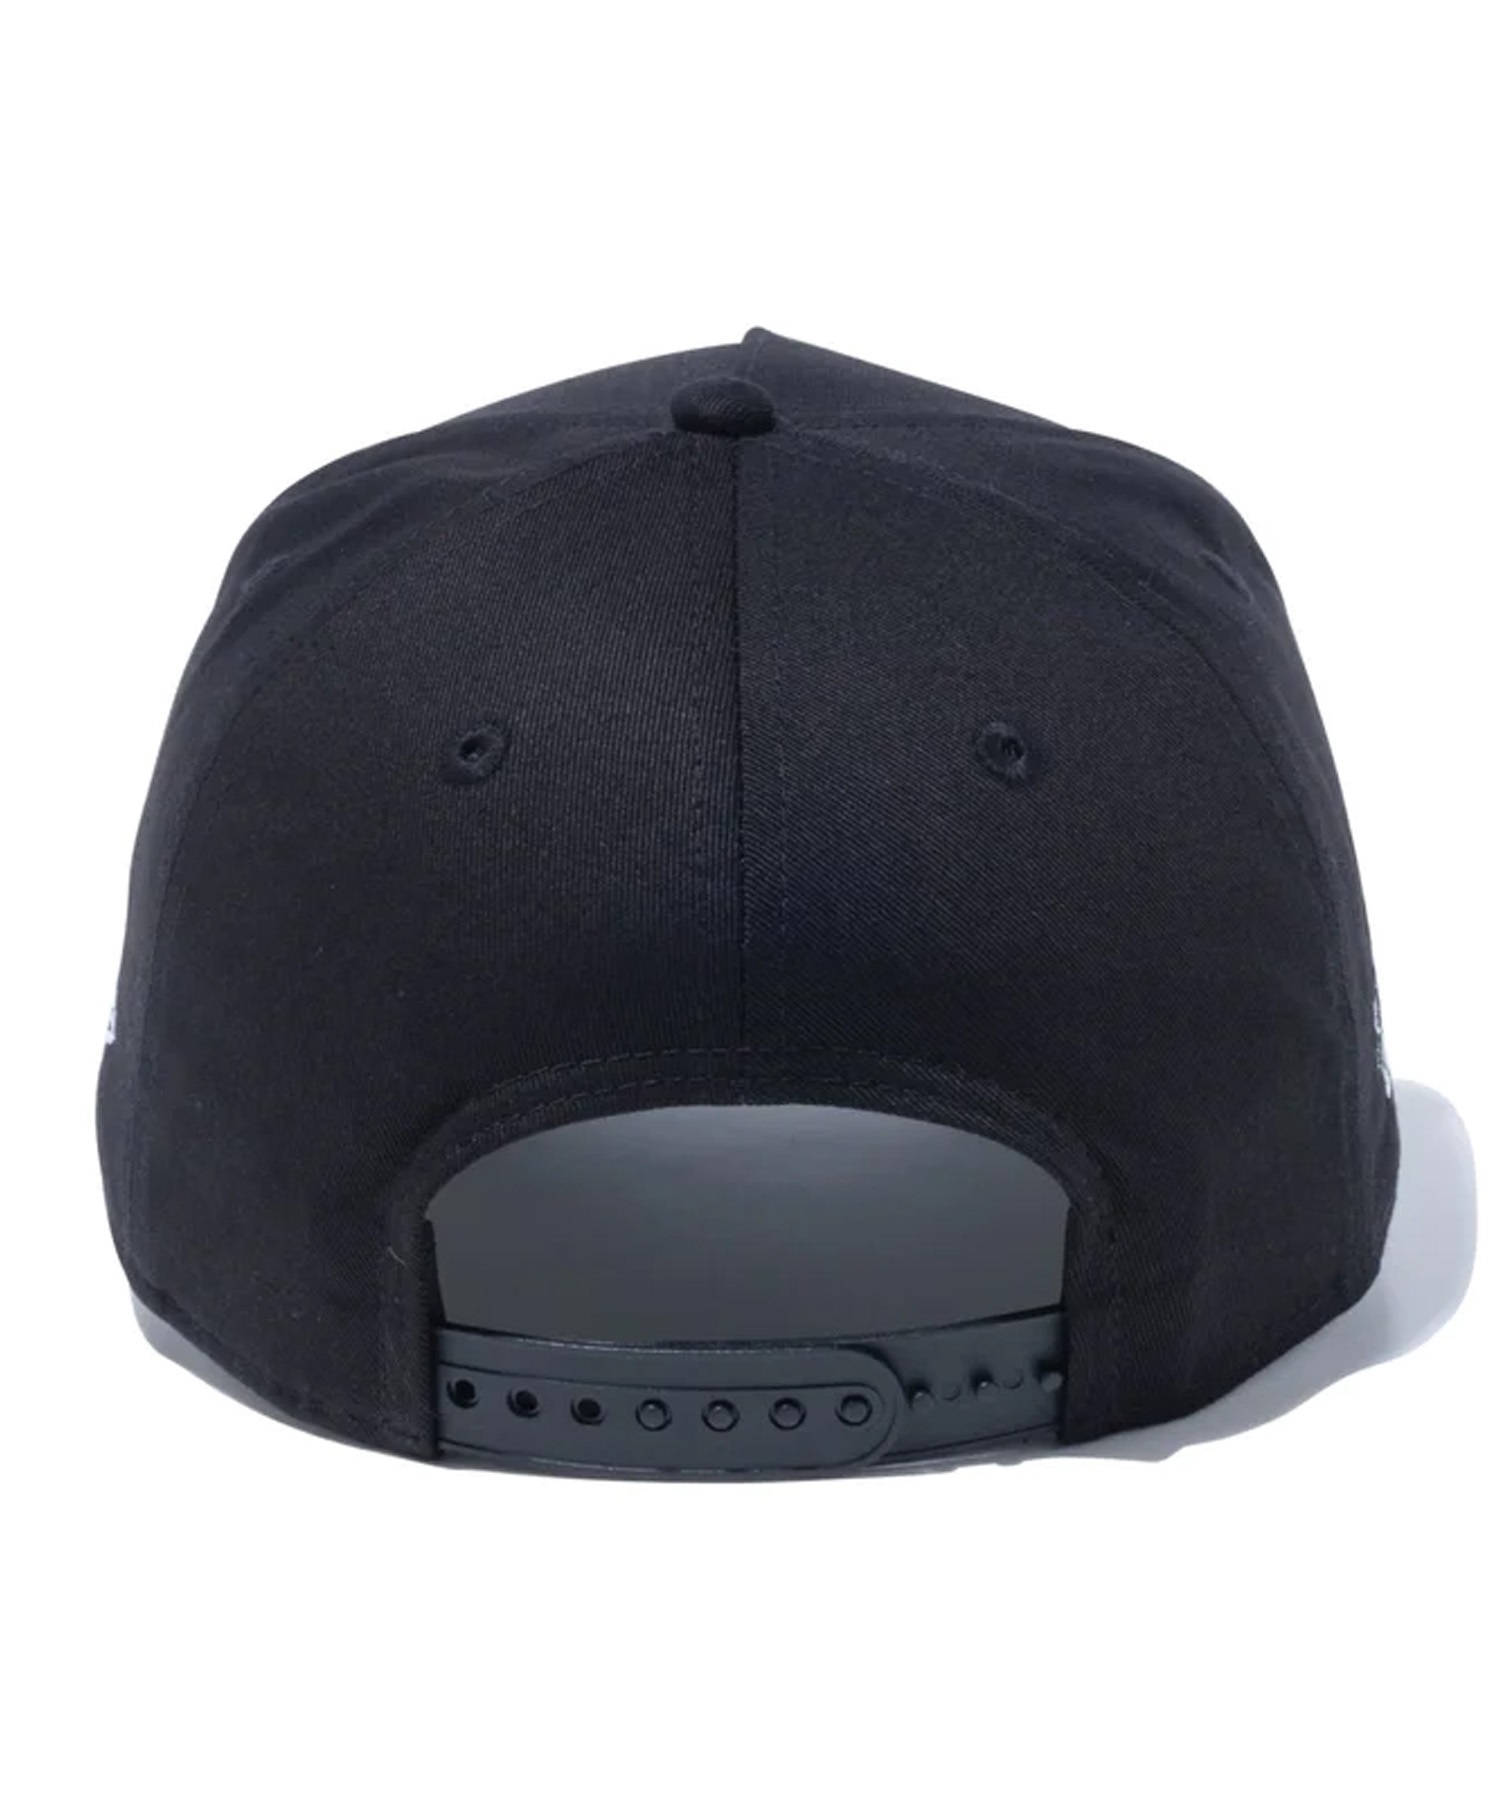 NEW ERA/ニューエラ 9FORTY A-Frame Black and White ロサンゼルス 